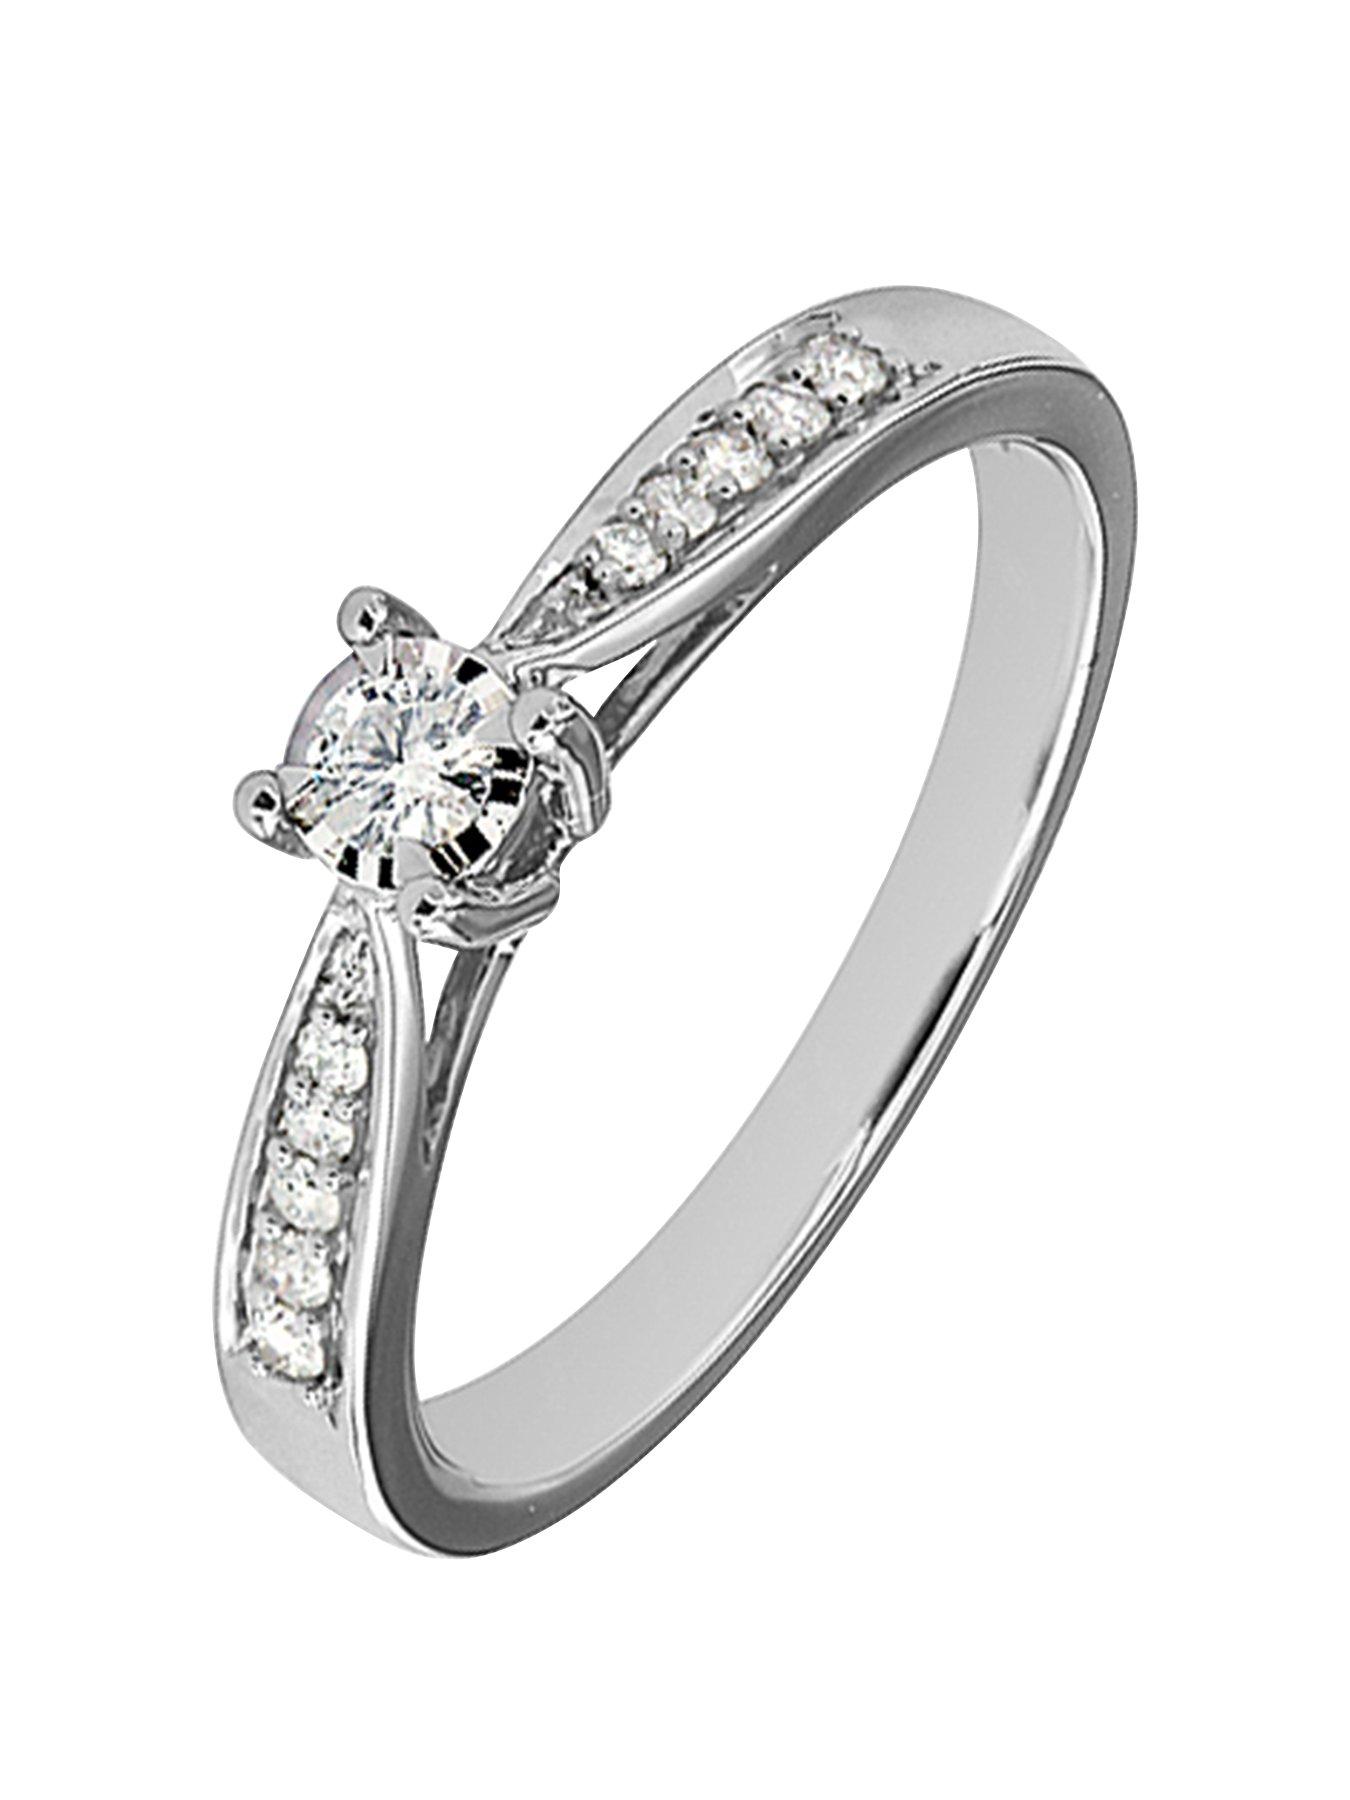  9ct White Gold 19 Point Diamond Engagement Ring